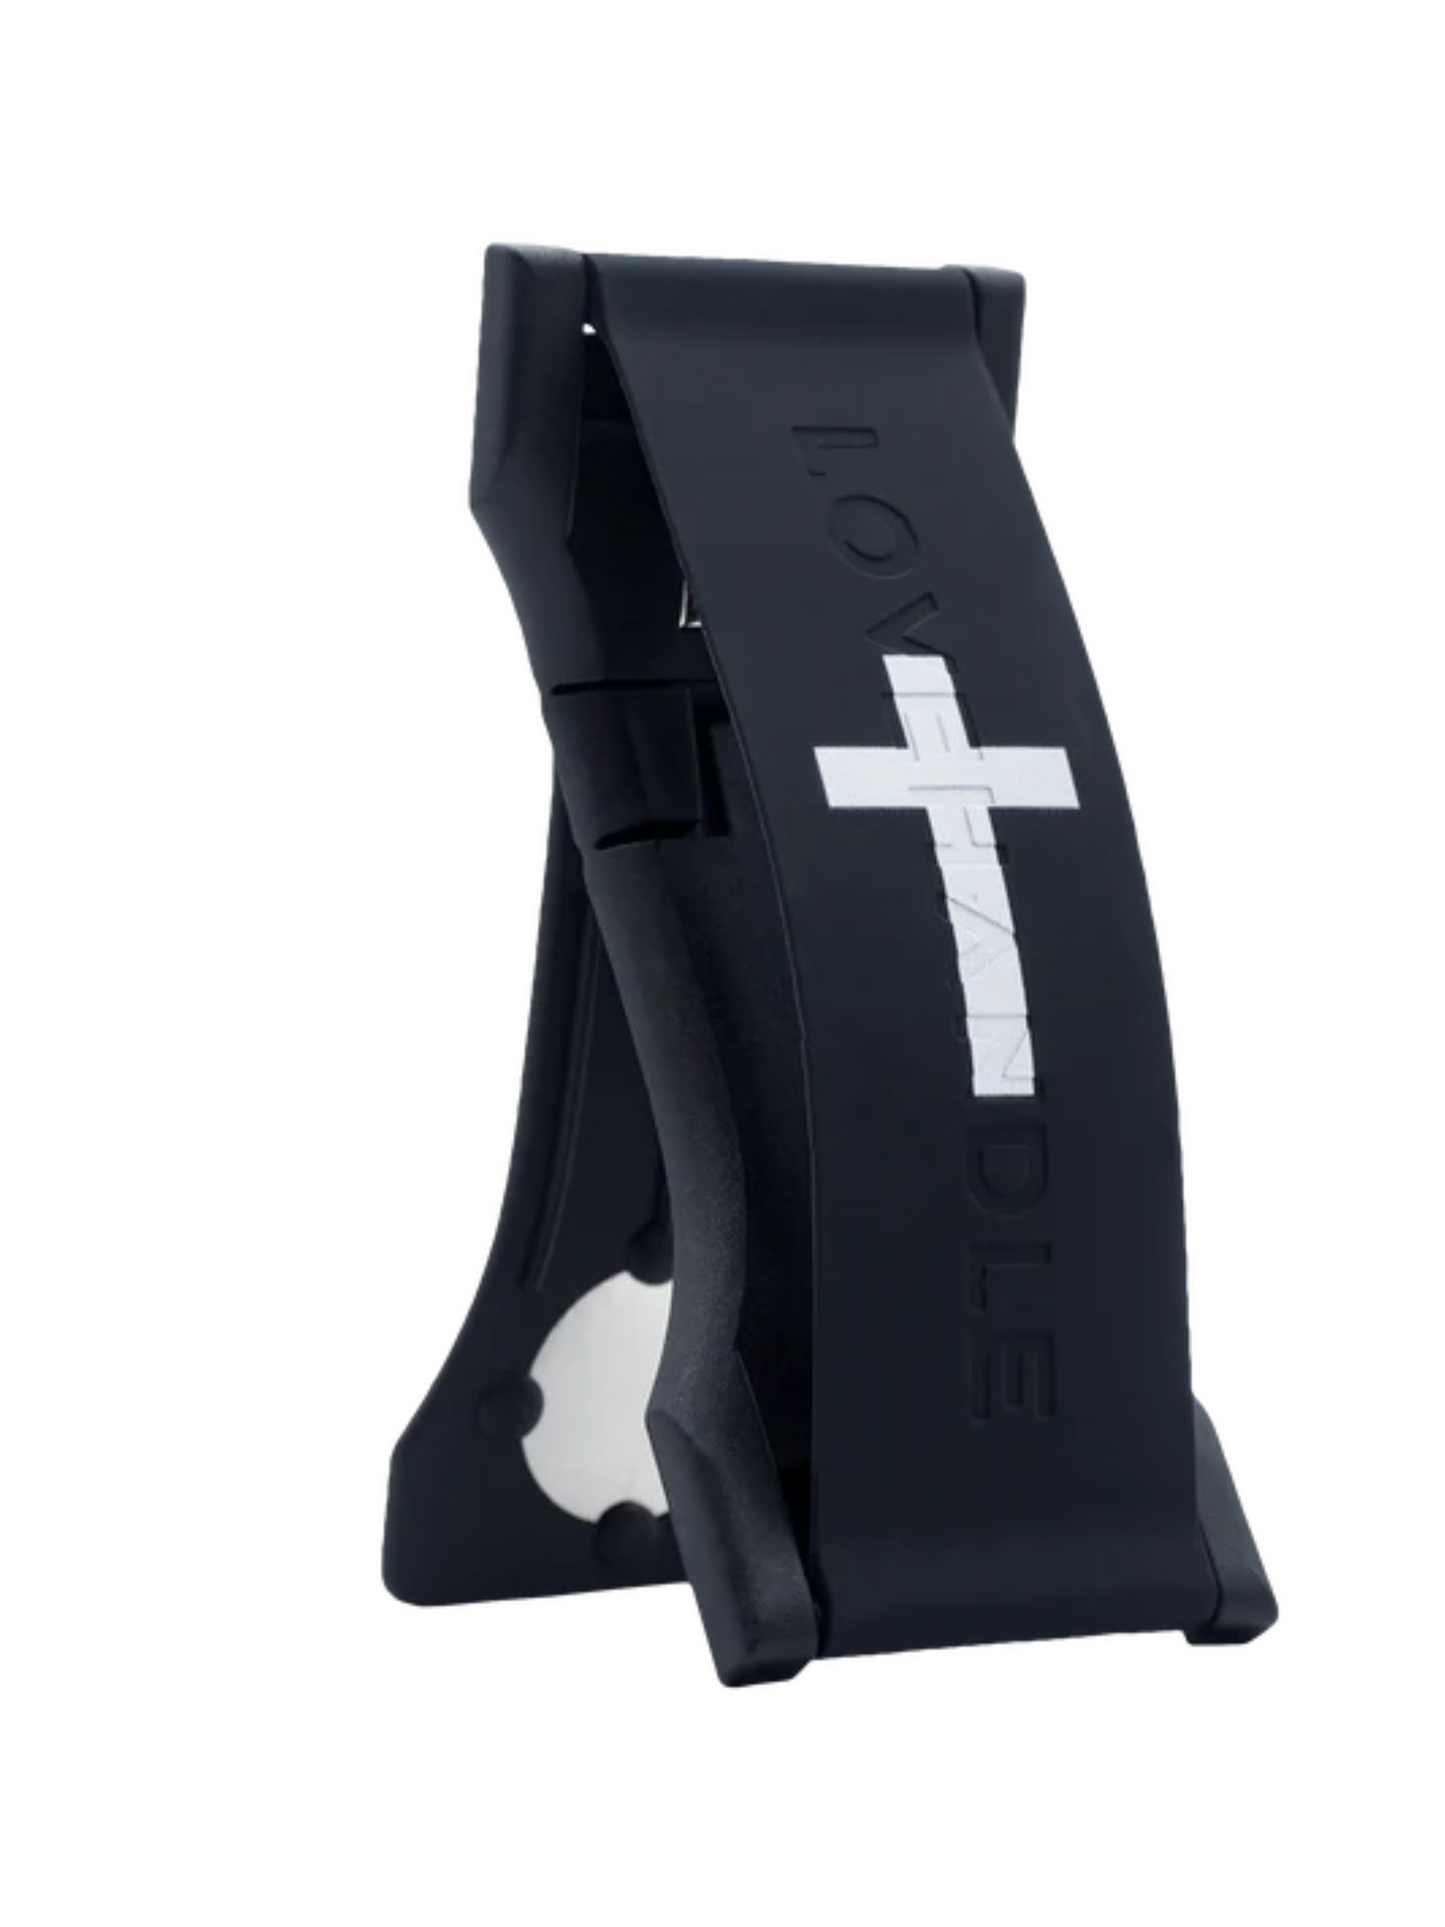 LOVE HANDLE PRO SILICONE PHONE GRIP WHITE CROSS ON BLACK - THE HIP EAGLE BOUTIQUE